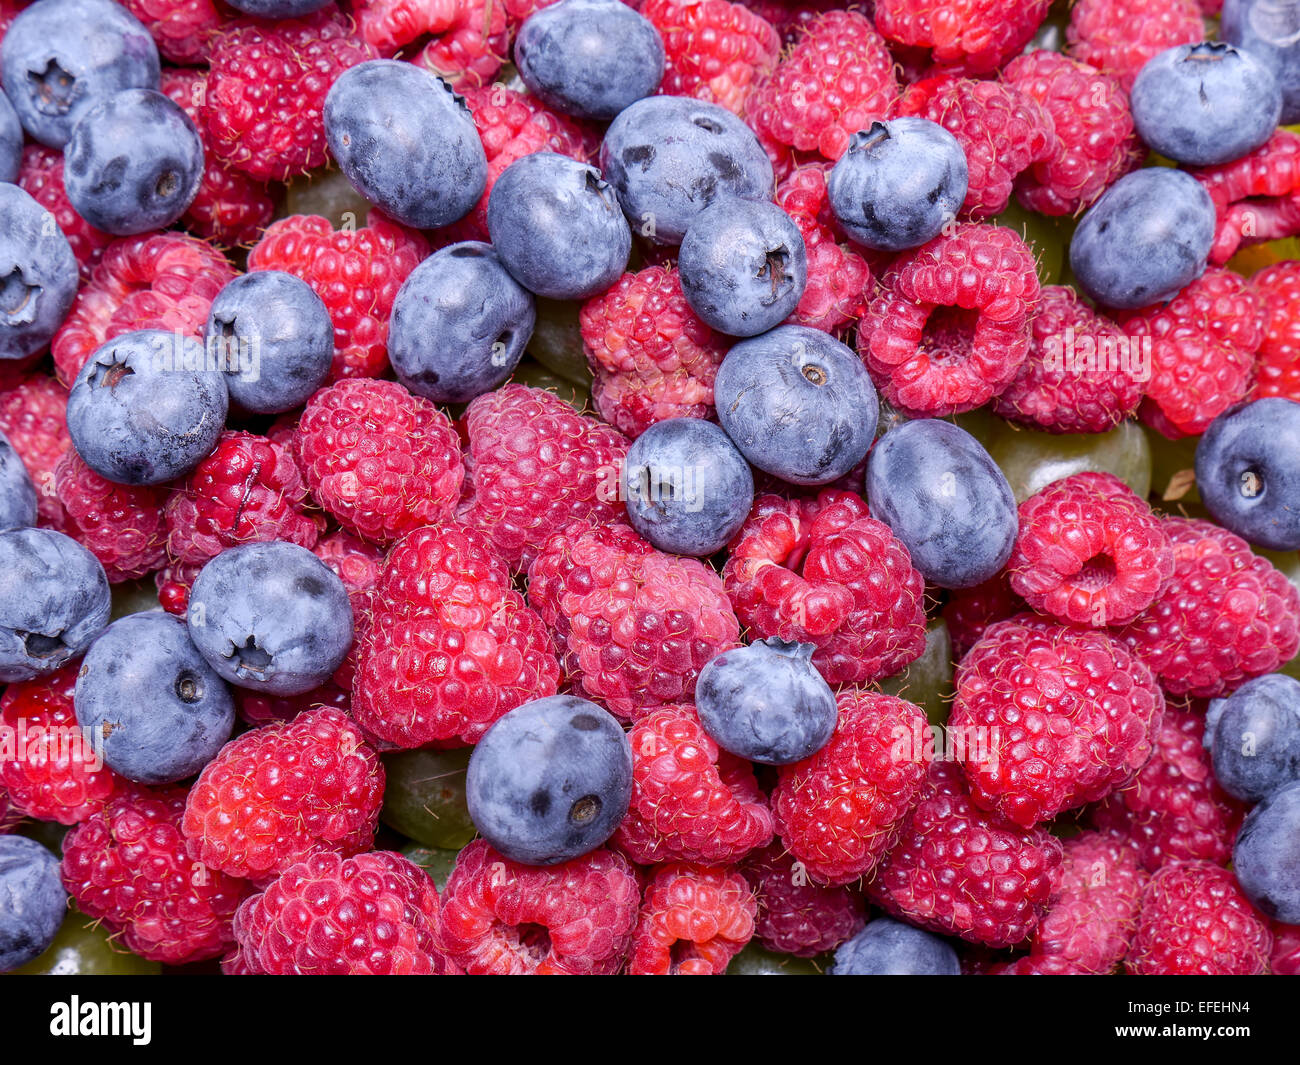 Mix of juicy and ripe raspberries and cowberries Stock Photo